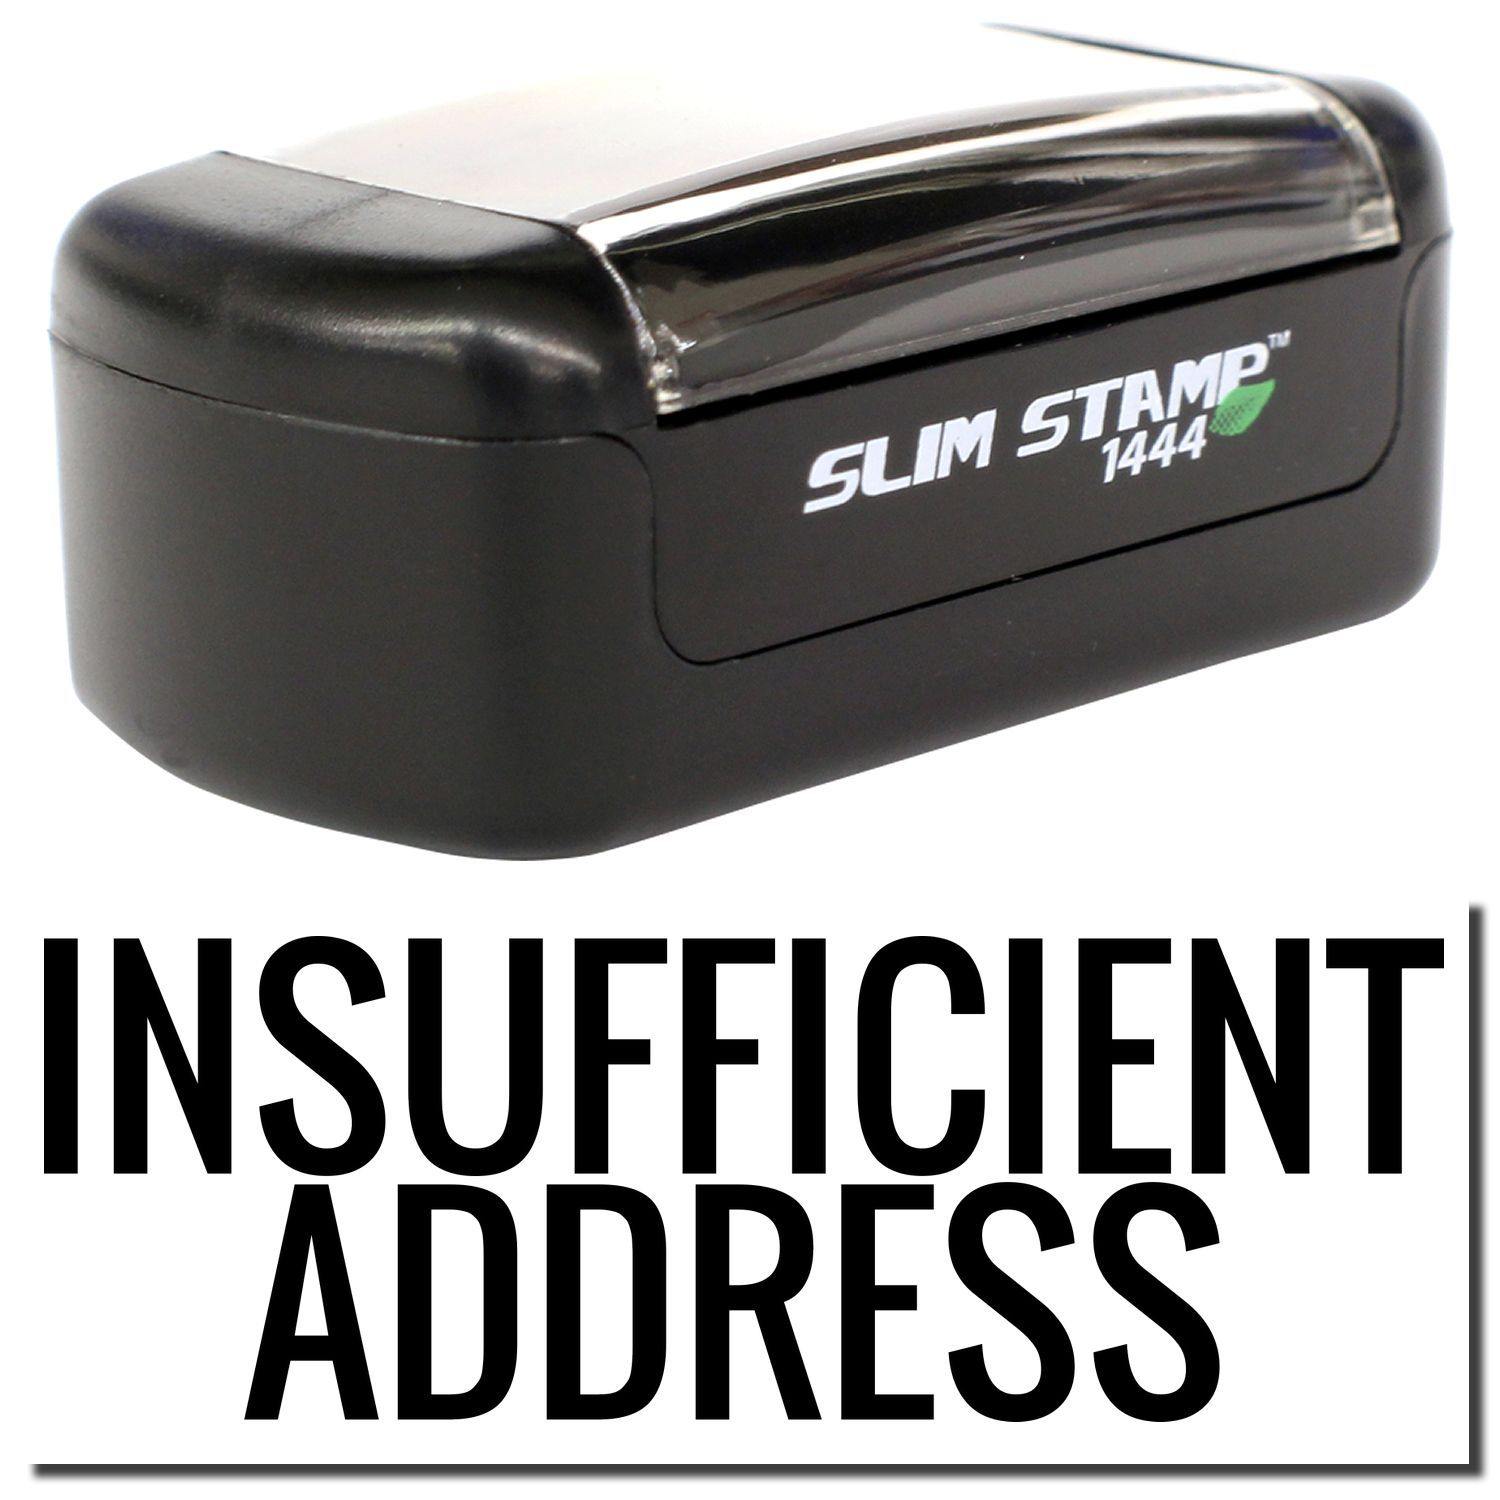 A stock office pre-inked stamp with a stamped image showing how the text "INSUFFICIENT ADDRESS" is displayed after stamping.